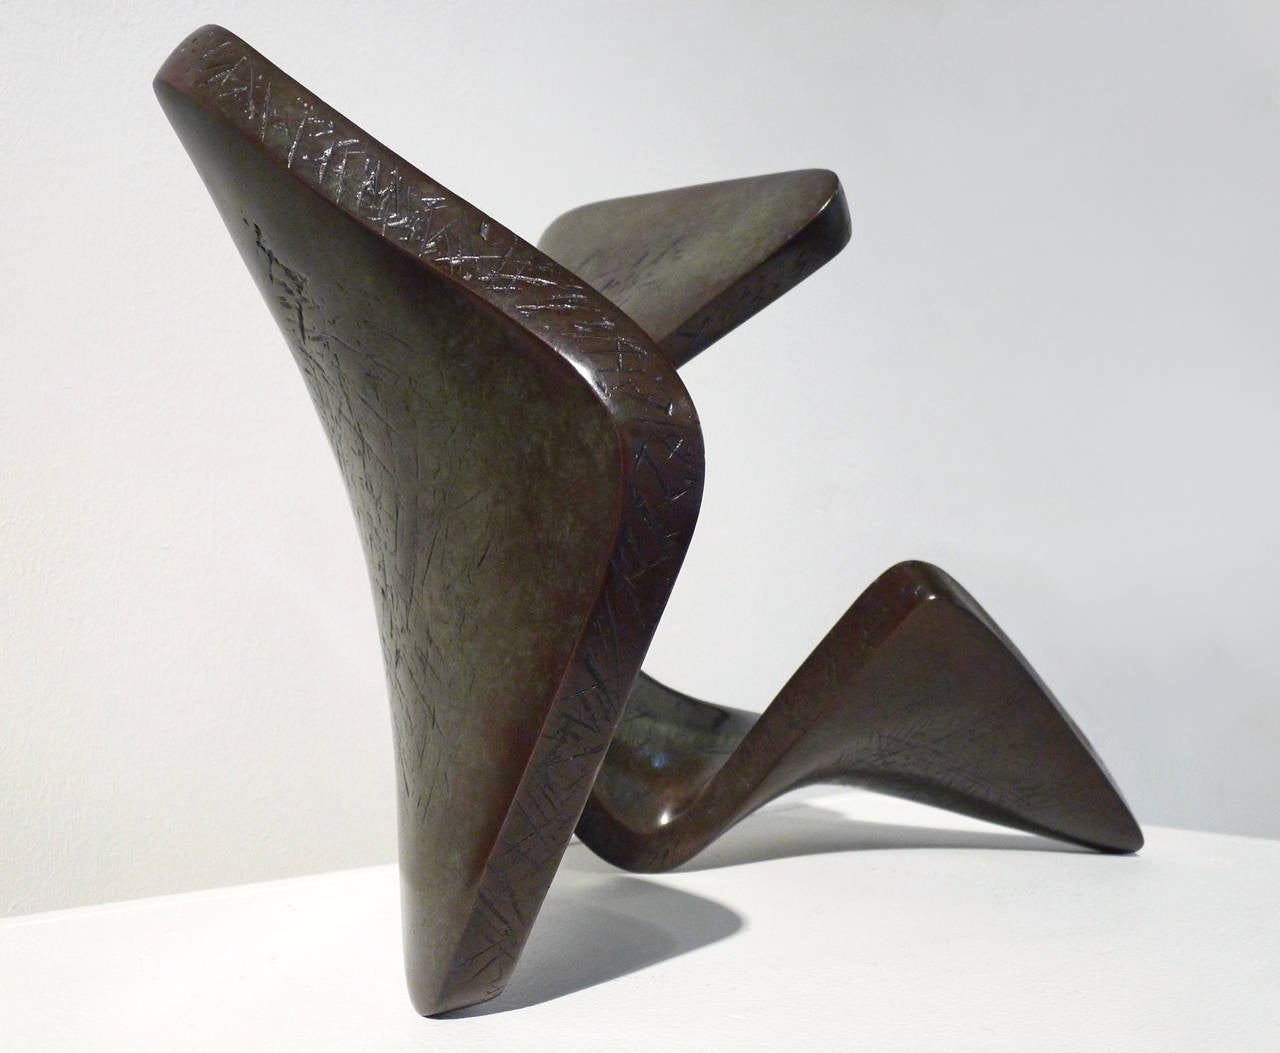 Situ is a pedestal sized, cast bronze sculpture. Edition #2 of 8 (pictured here) has a dark patina in shades of reddish brown and green, and the bronze surfaces are detailed with a crosshatched texture. The work is signed on the back and the edition